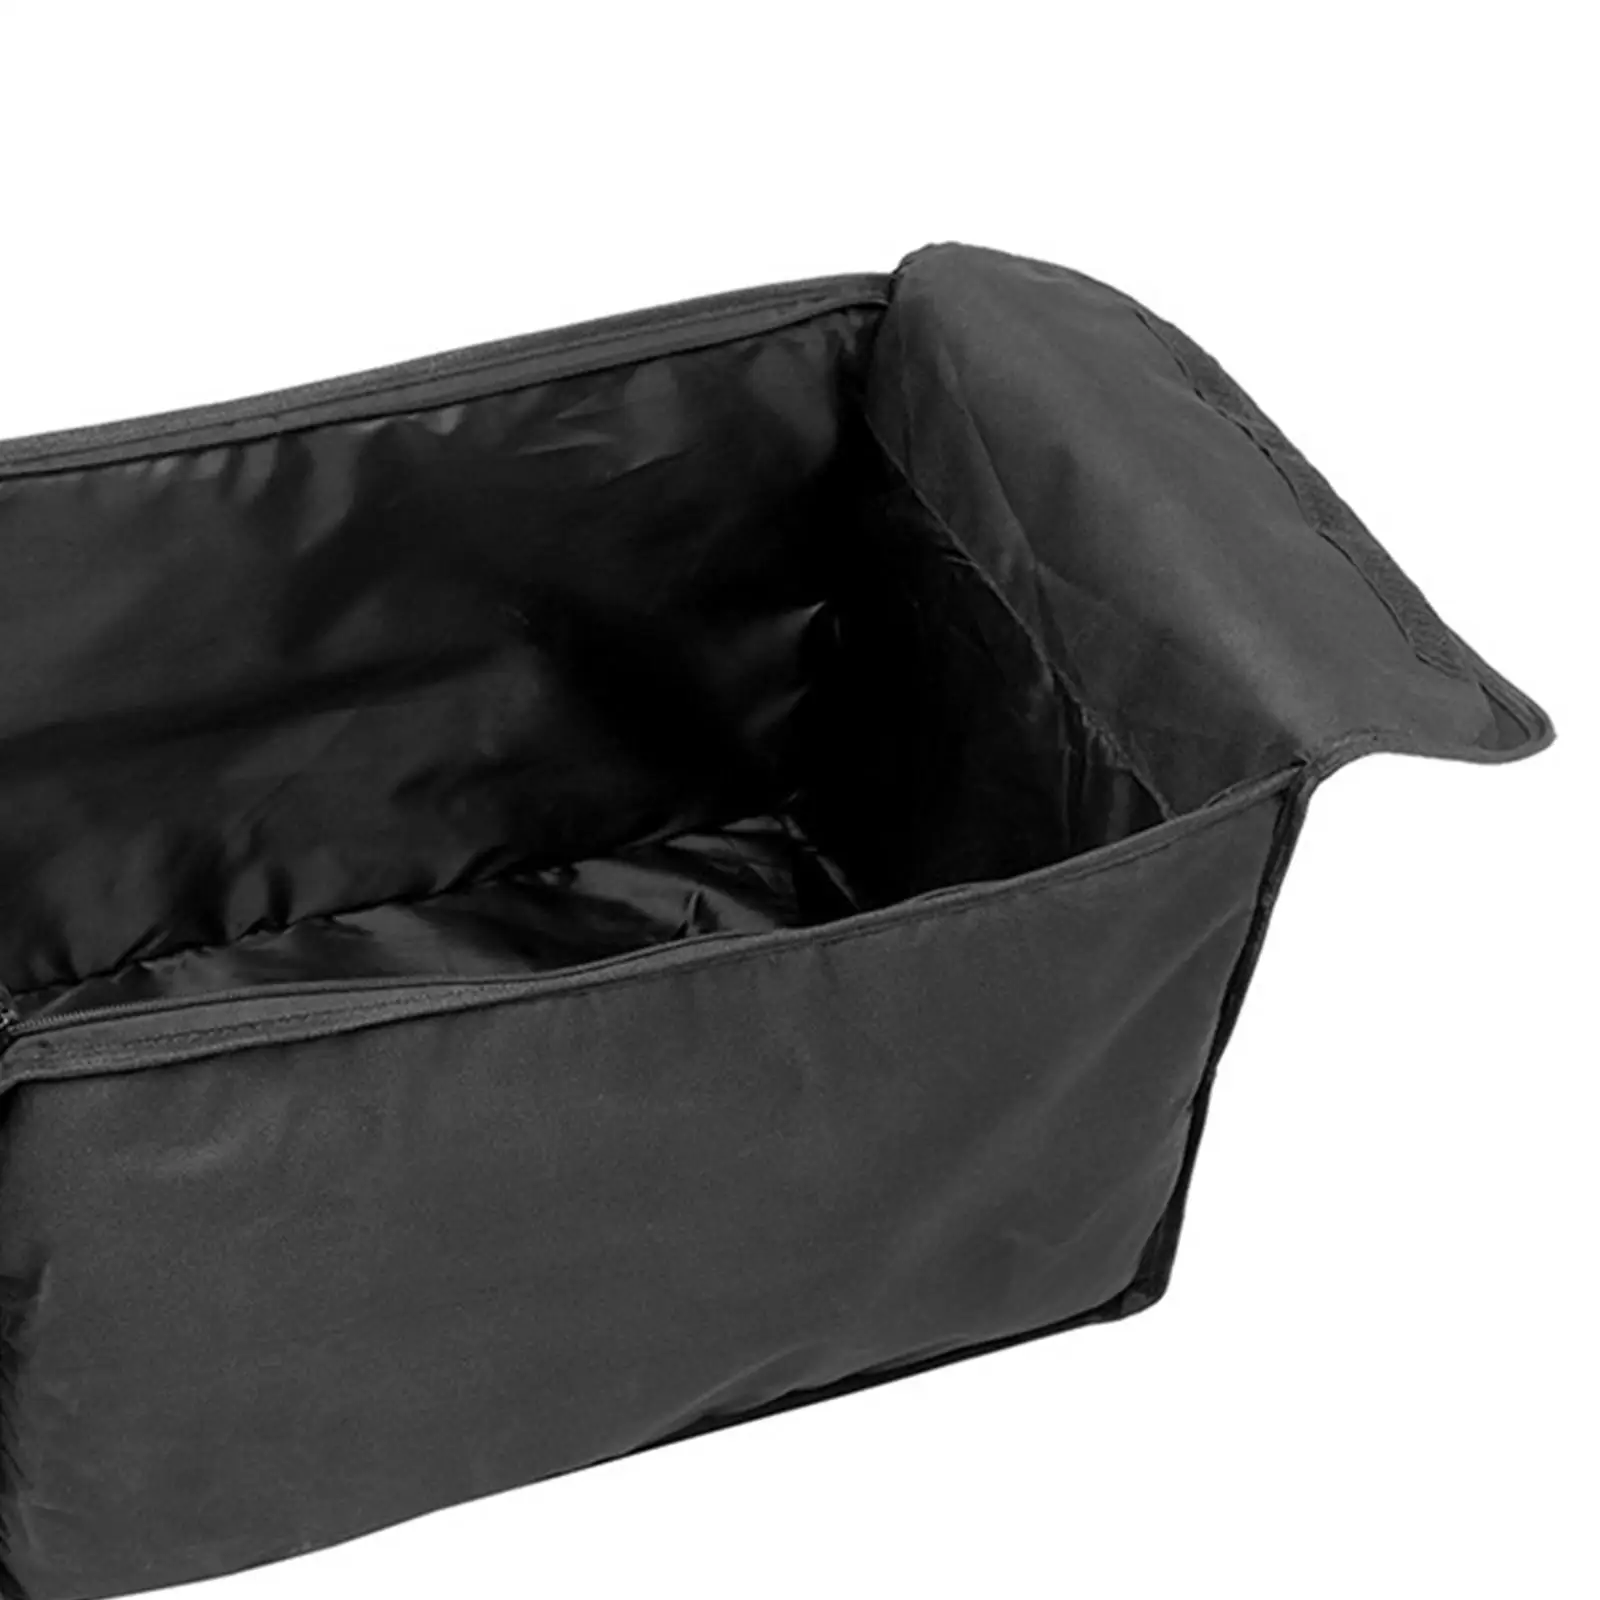 Oxford Cloth Drum Storage Bag with Carrying Grip, Musical Instrument Accessories